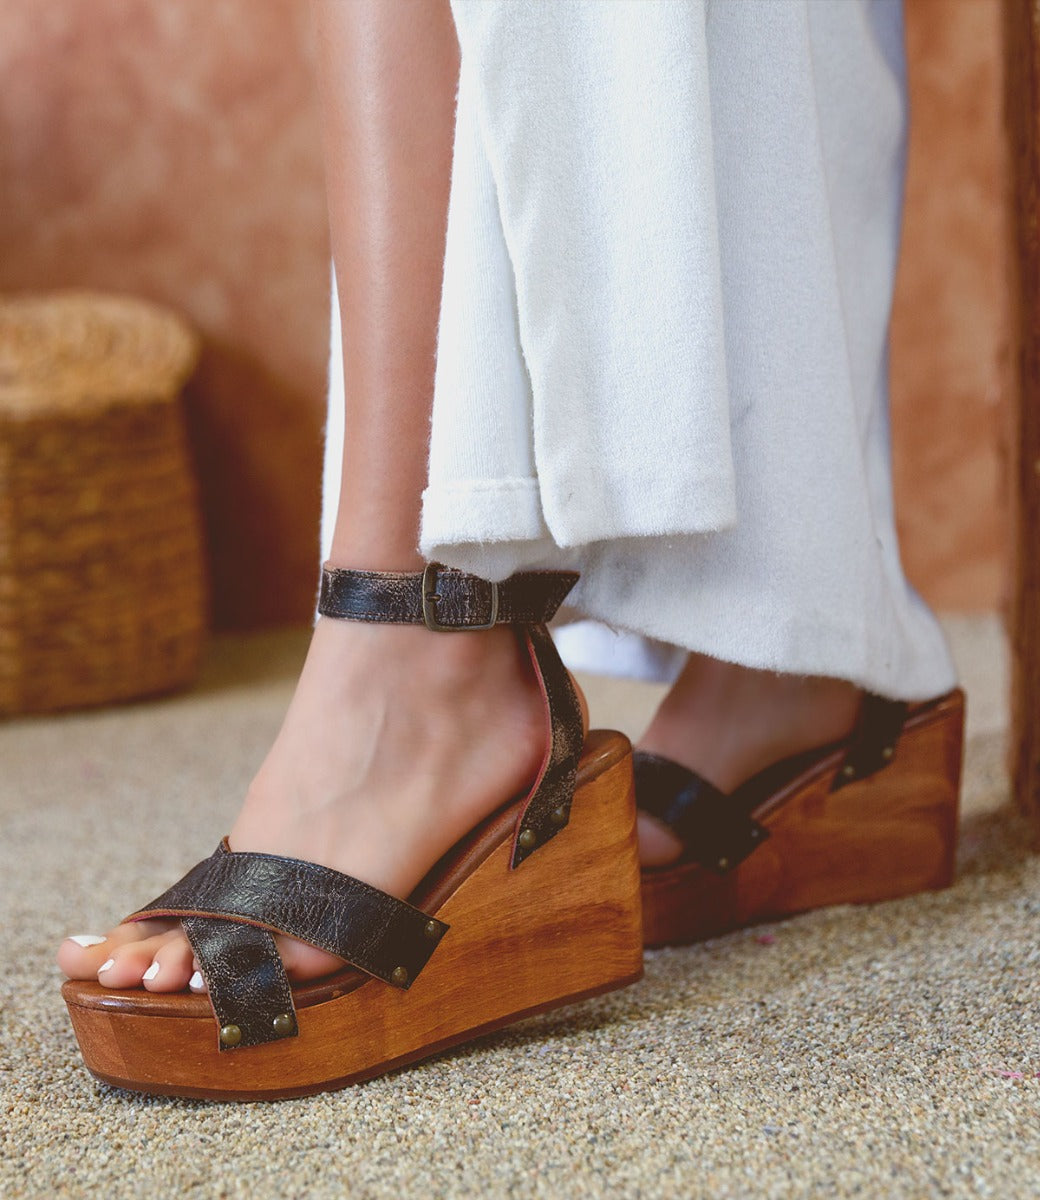 A woman's feet in a pair of Bed Stu Grettell wooden sandals.